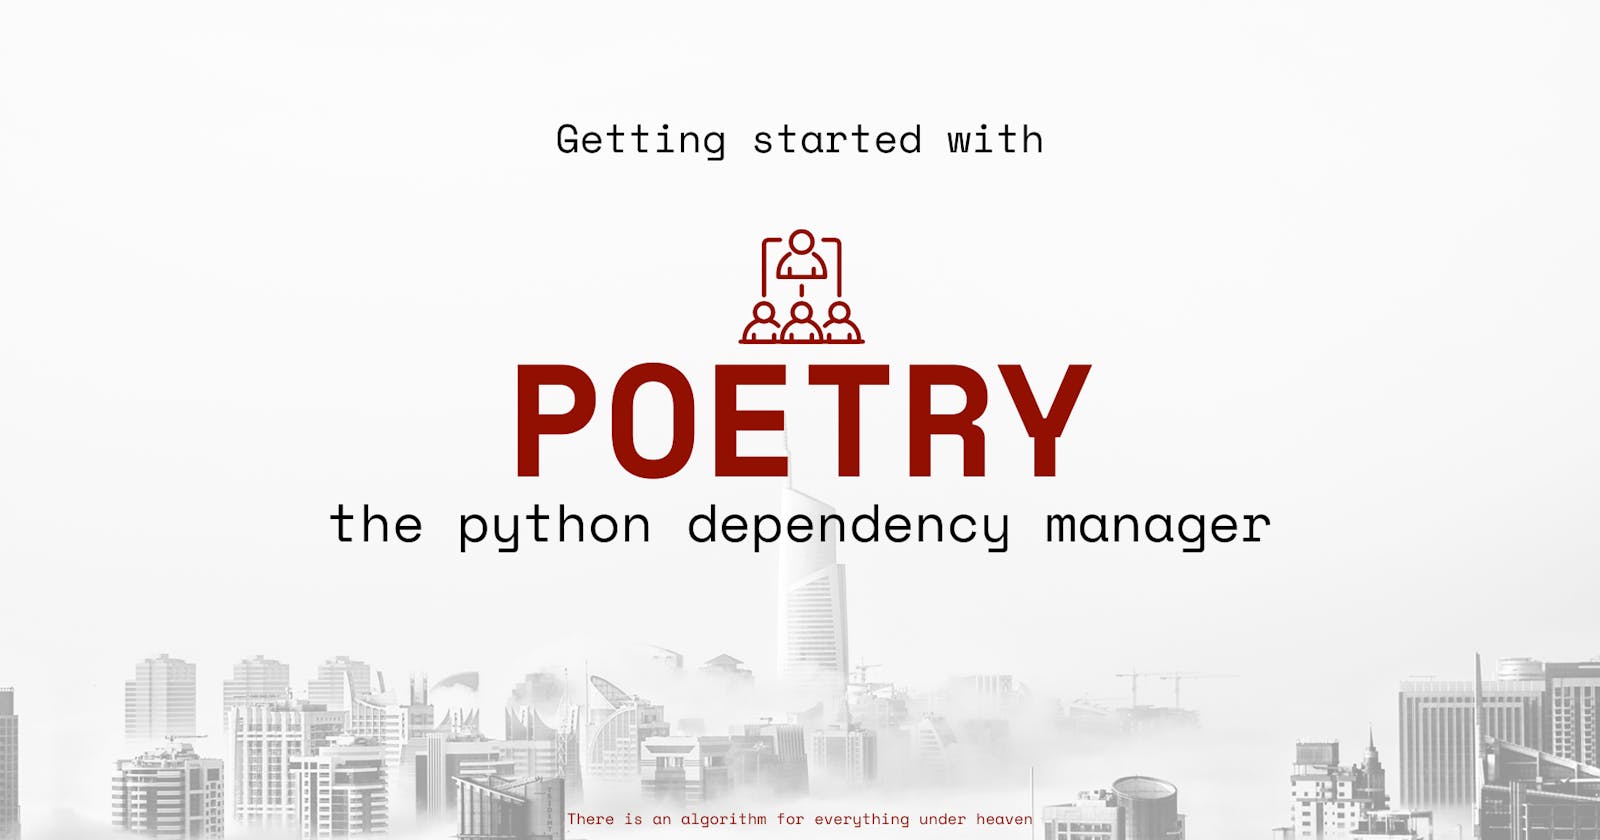 Getting started with POETRY 
(the python dependency manager)